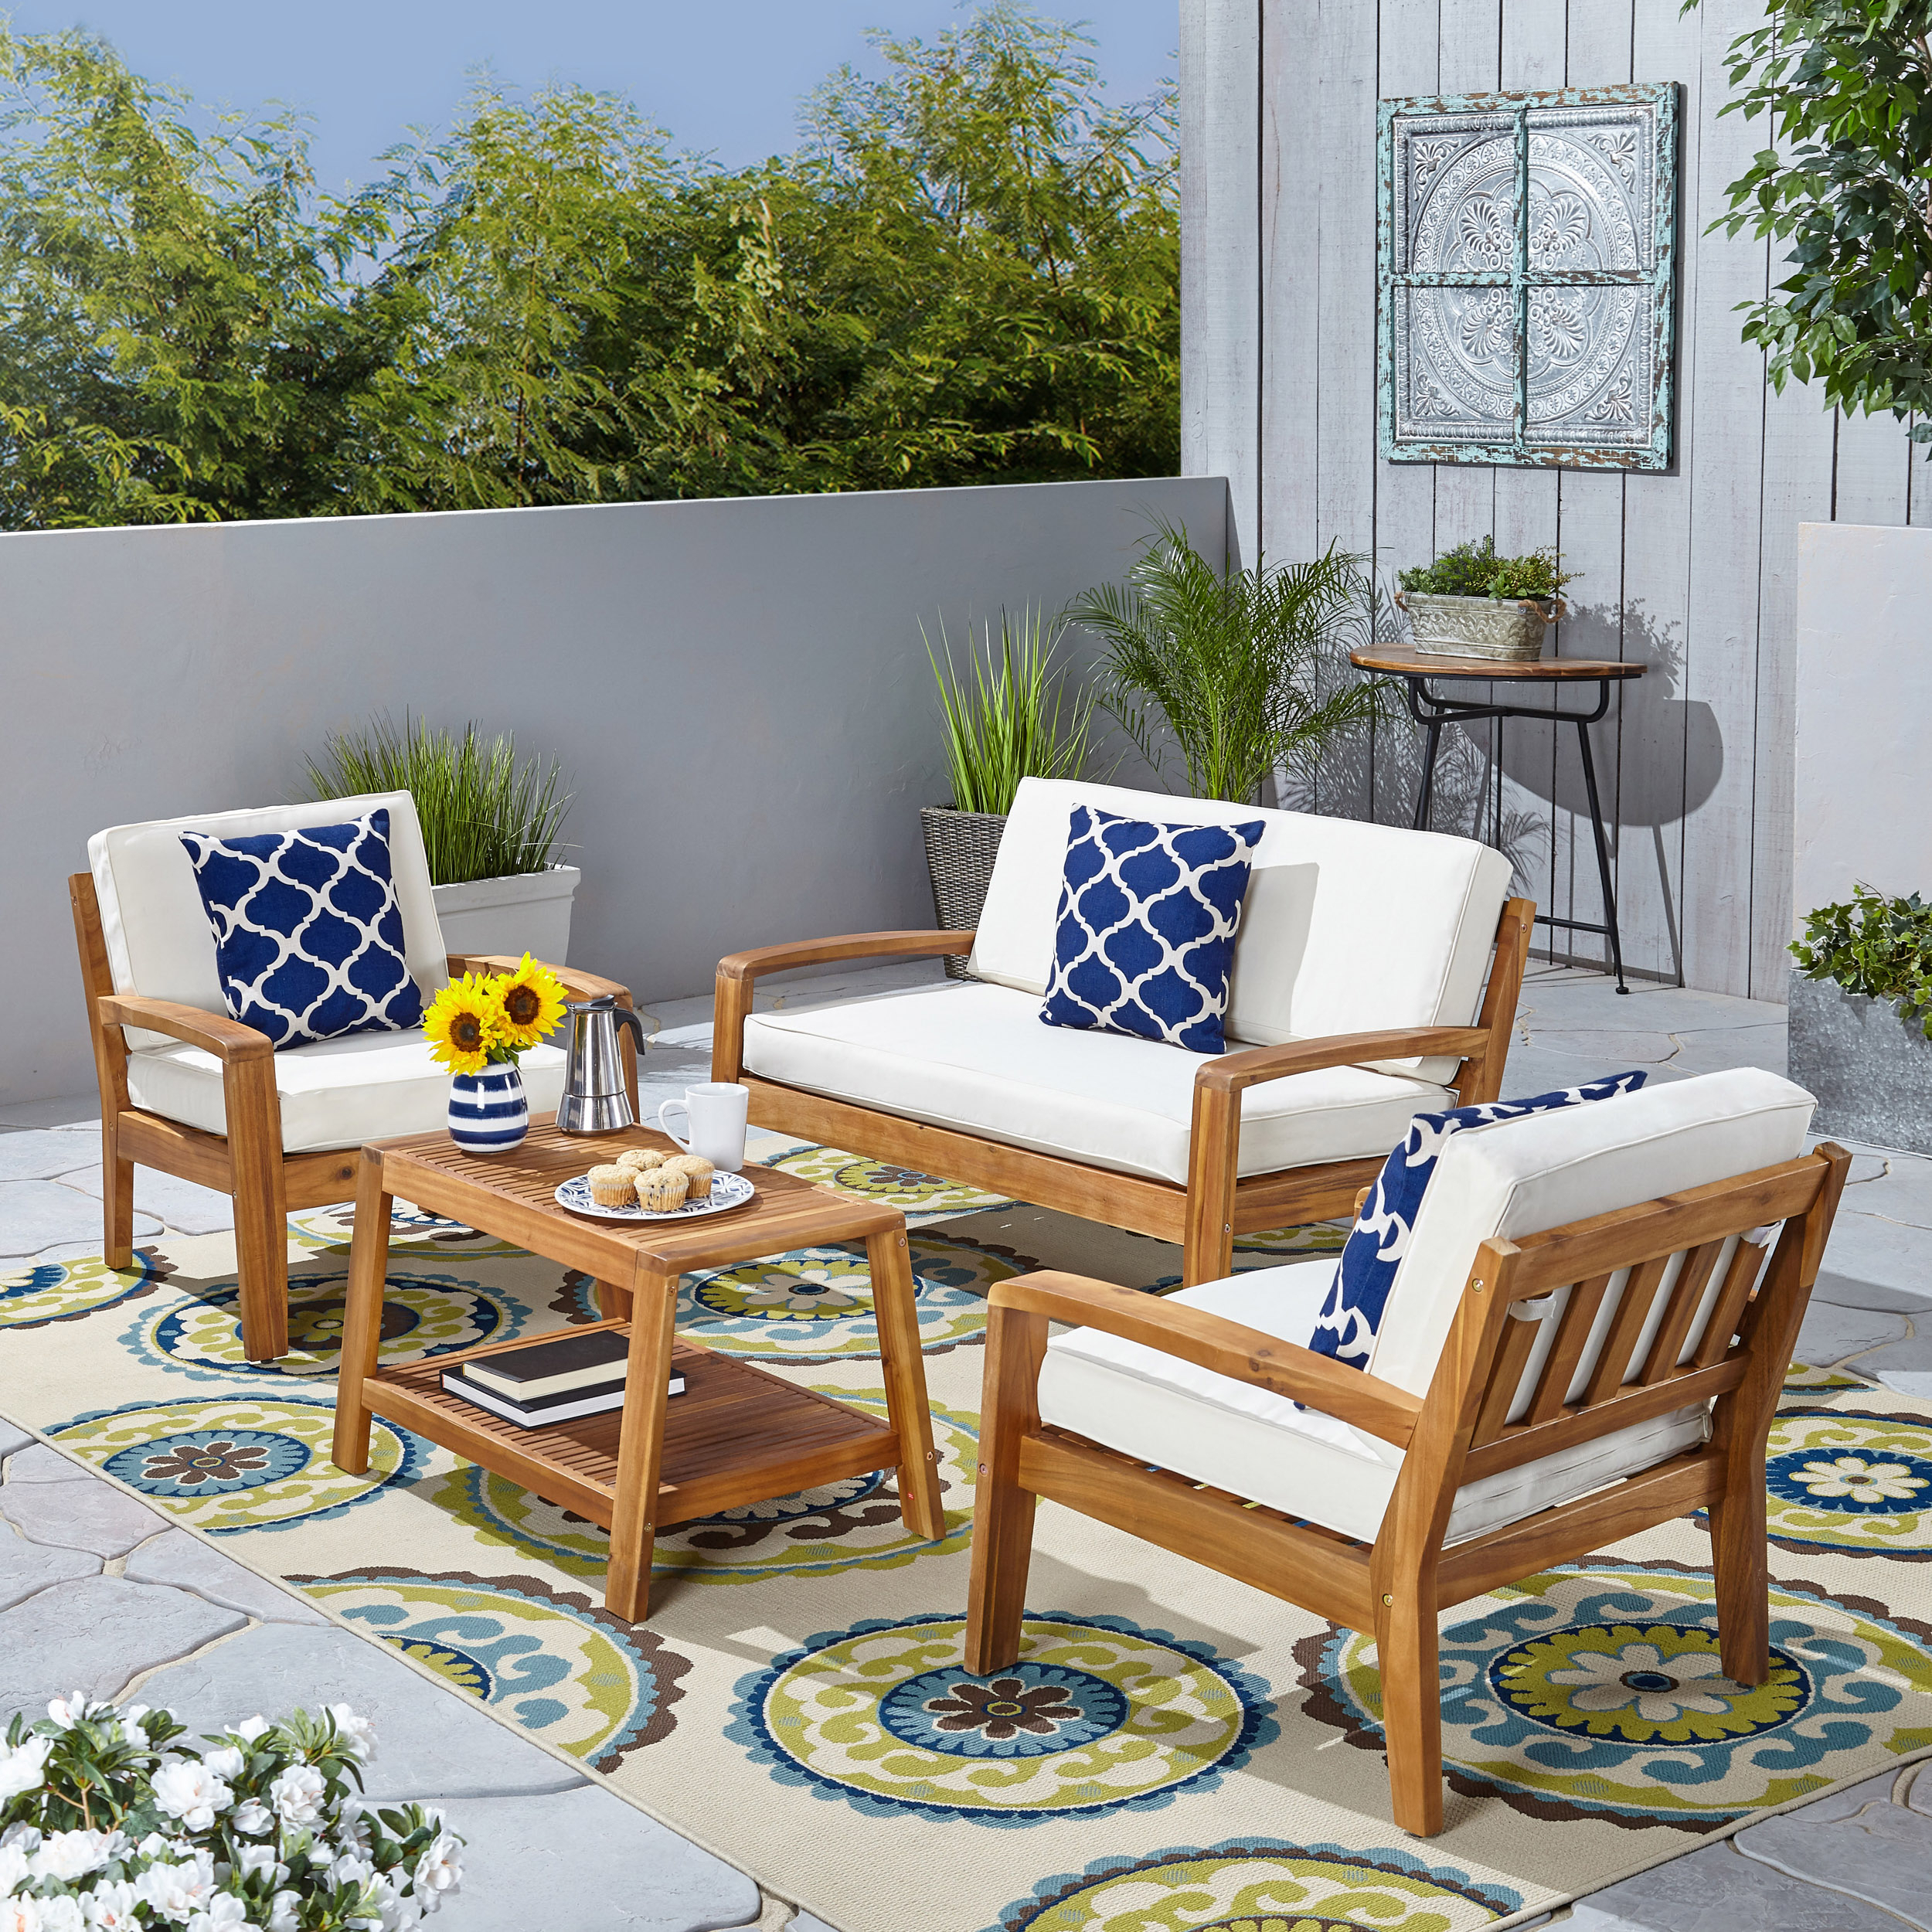 Parma 4pc Outdoor Sofa Set With Cushions - Beige